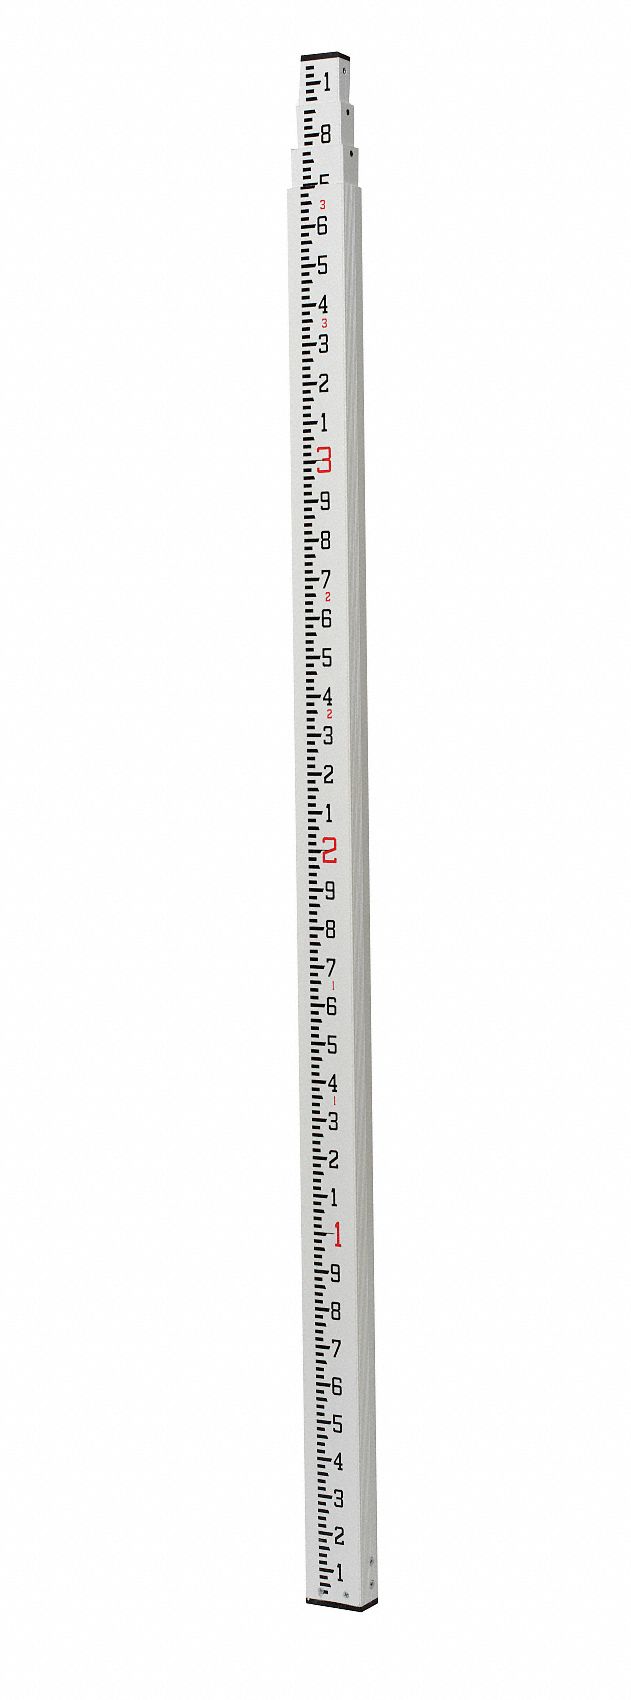 Leveling Rod: Rectangular, Scale on Back Side, Permit to Read Ht at Eye Level, 4 Sections